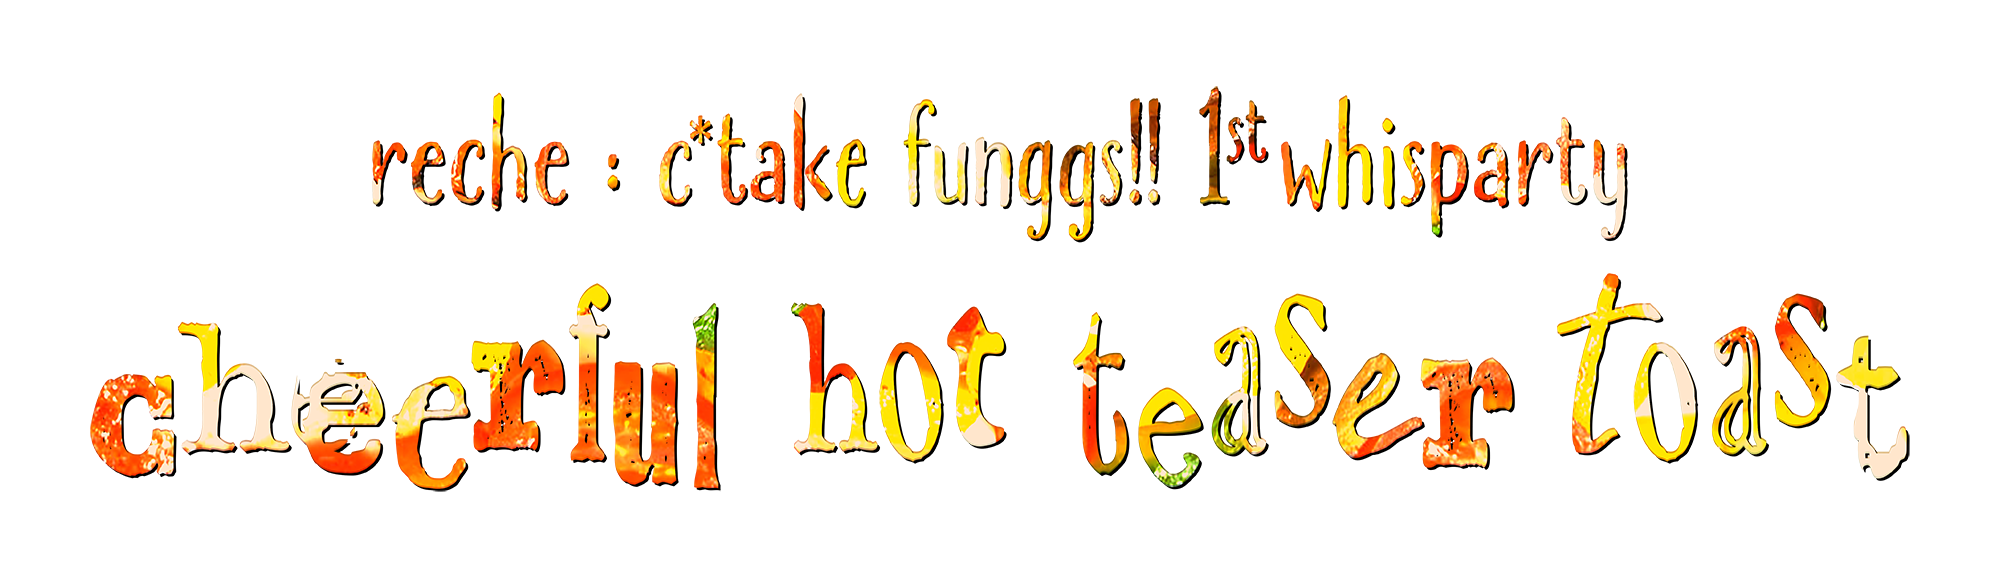 c*take funggs!! 1st whisparty cheerful hot teaser toast